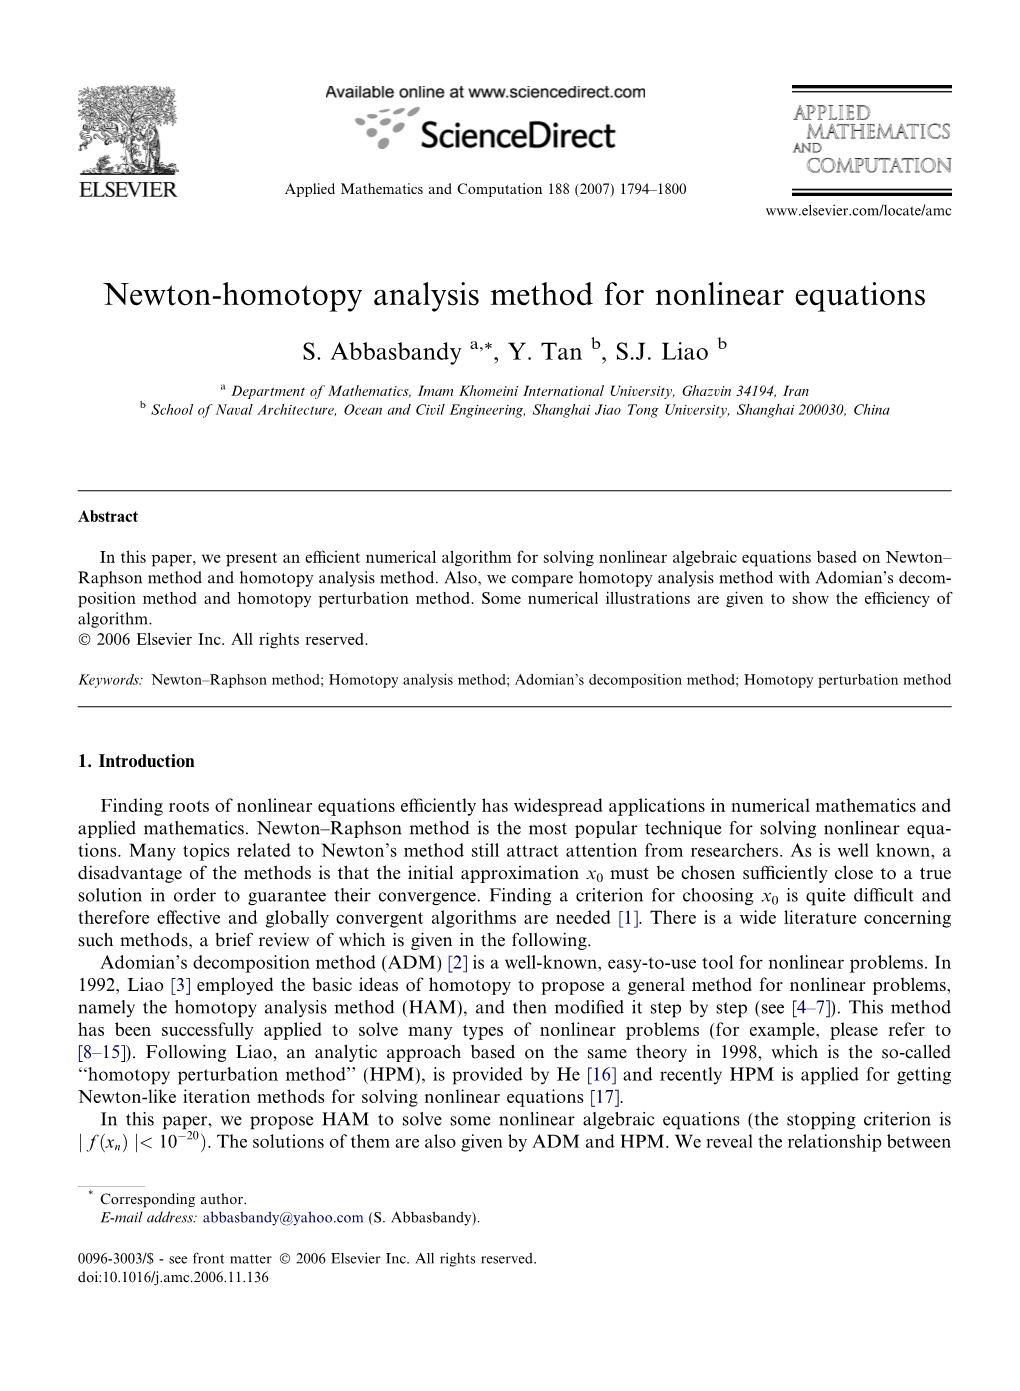 Newton-Homotopy Analysis Method for Nonlinear Equations